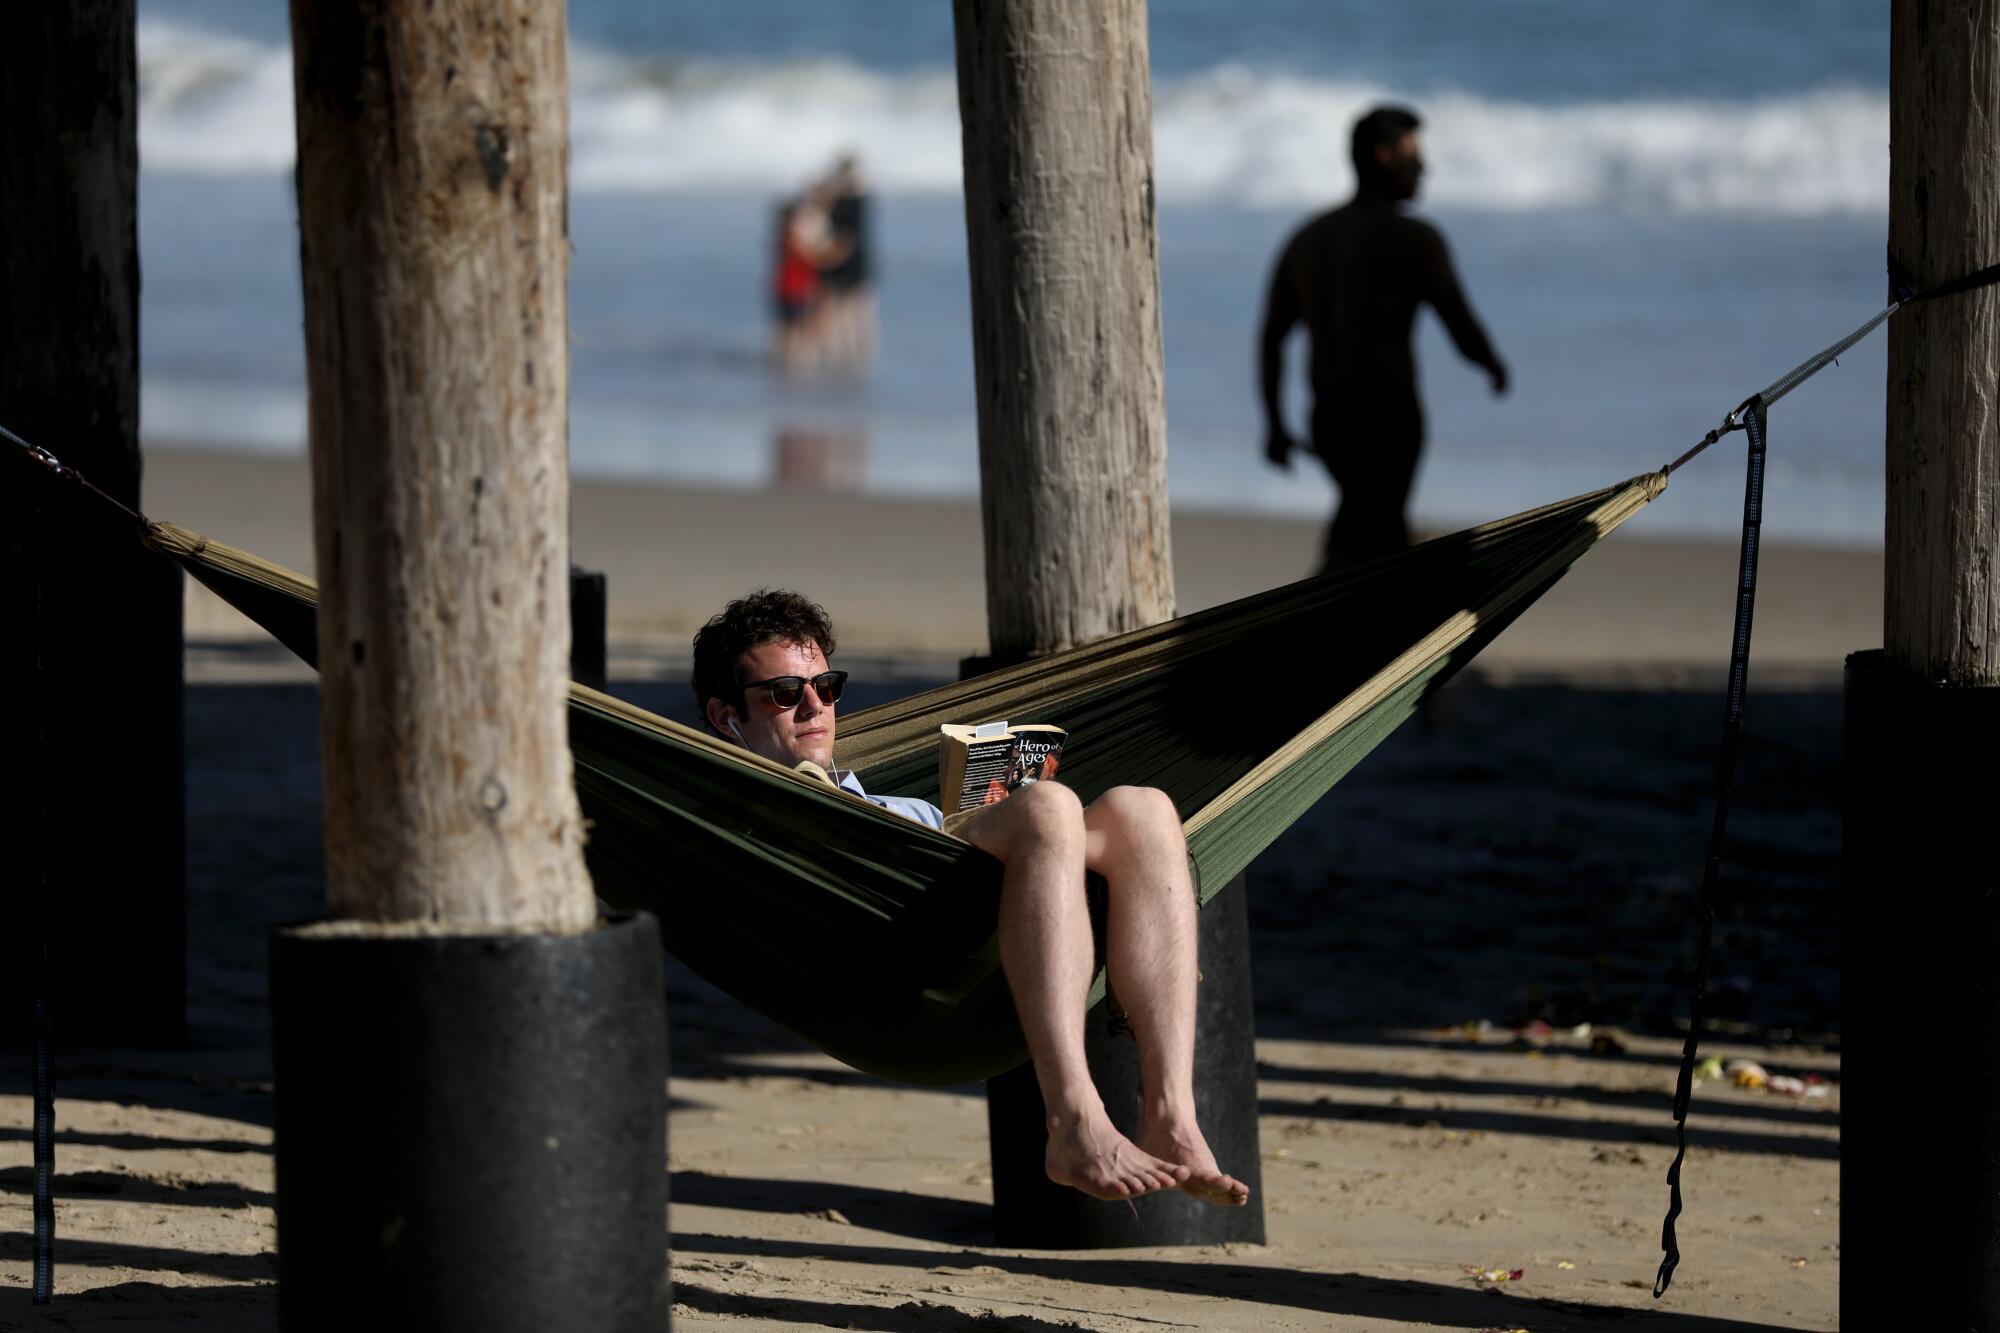 Tyler MacFarland reads a book under the pier at the beach in Ventura. "I am still working, and for the last month and a half it has been just work, home, work, home," he said.